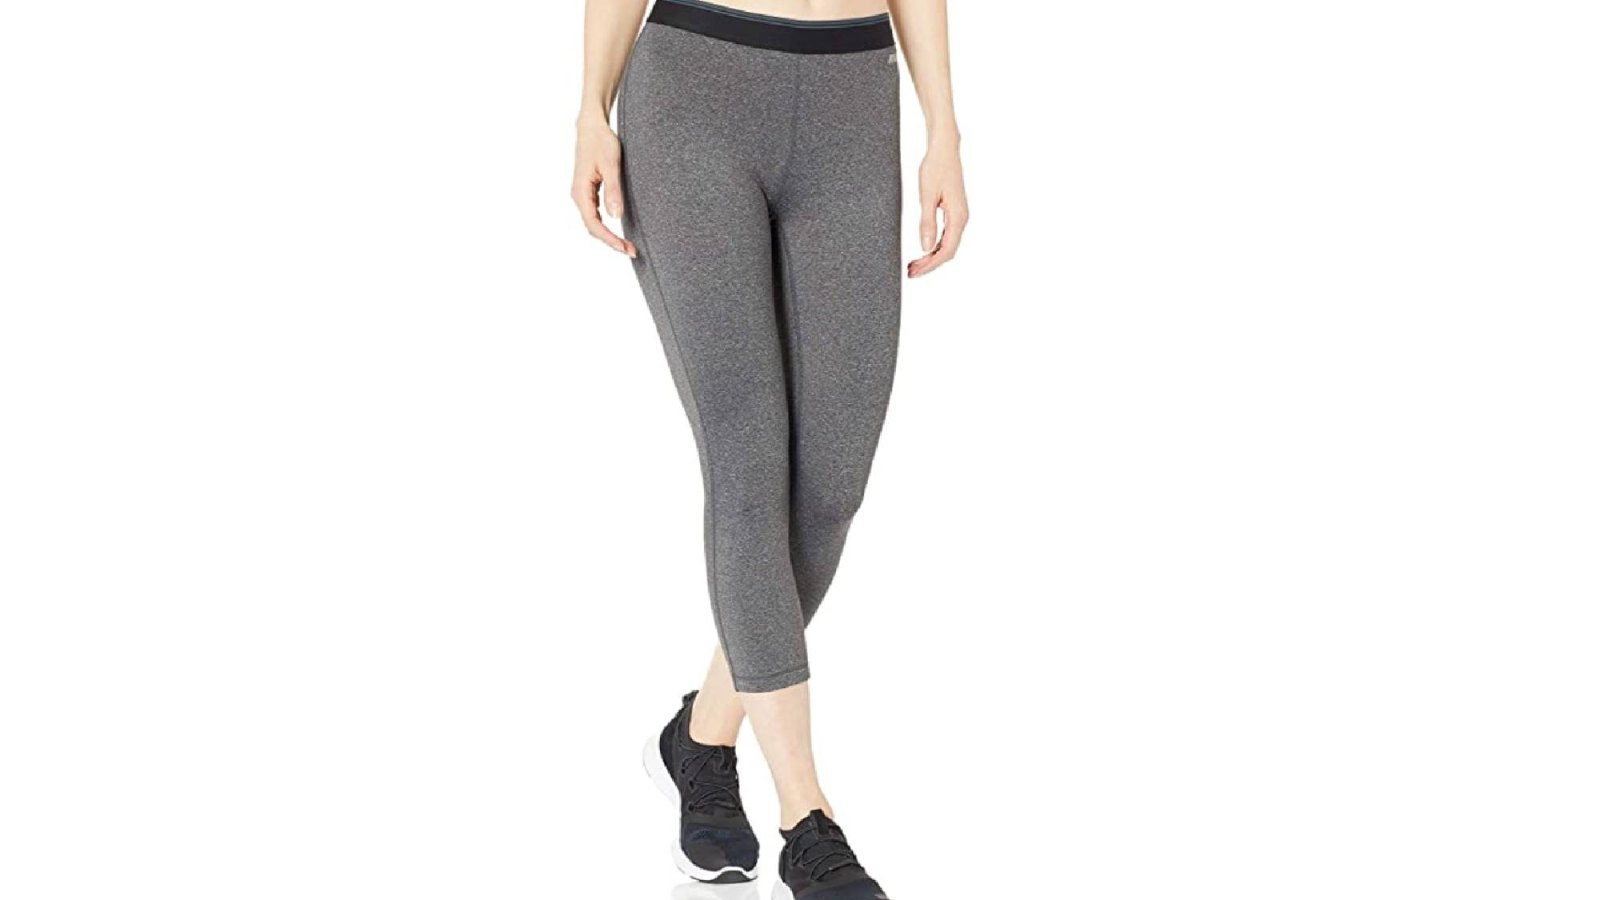 Leggings That Don't Show Crotch Sweat Health  International Society of  Precision Agriculture